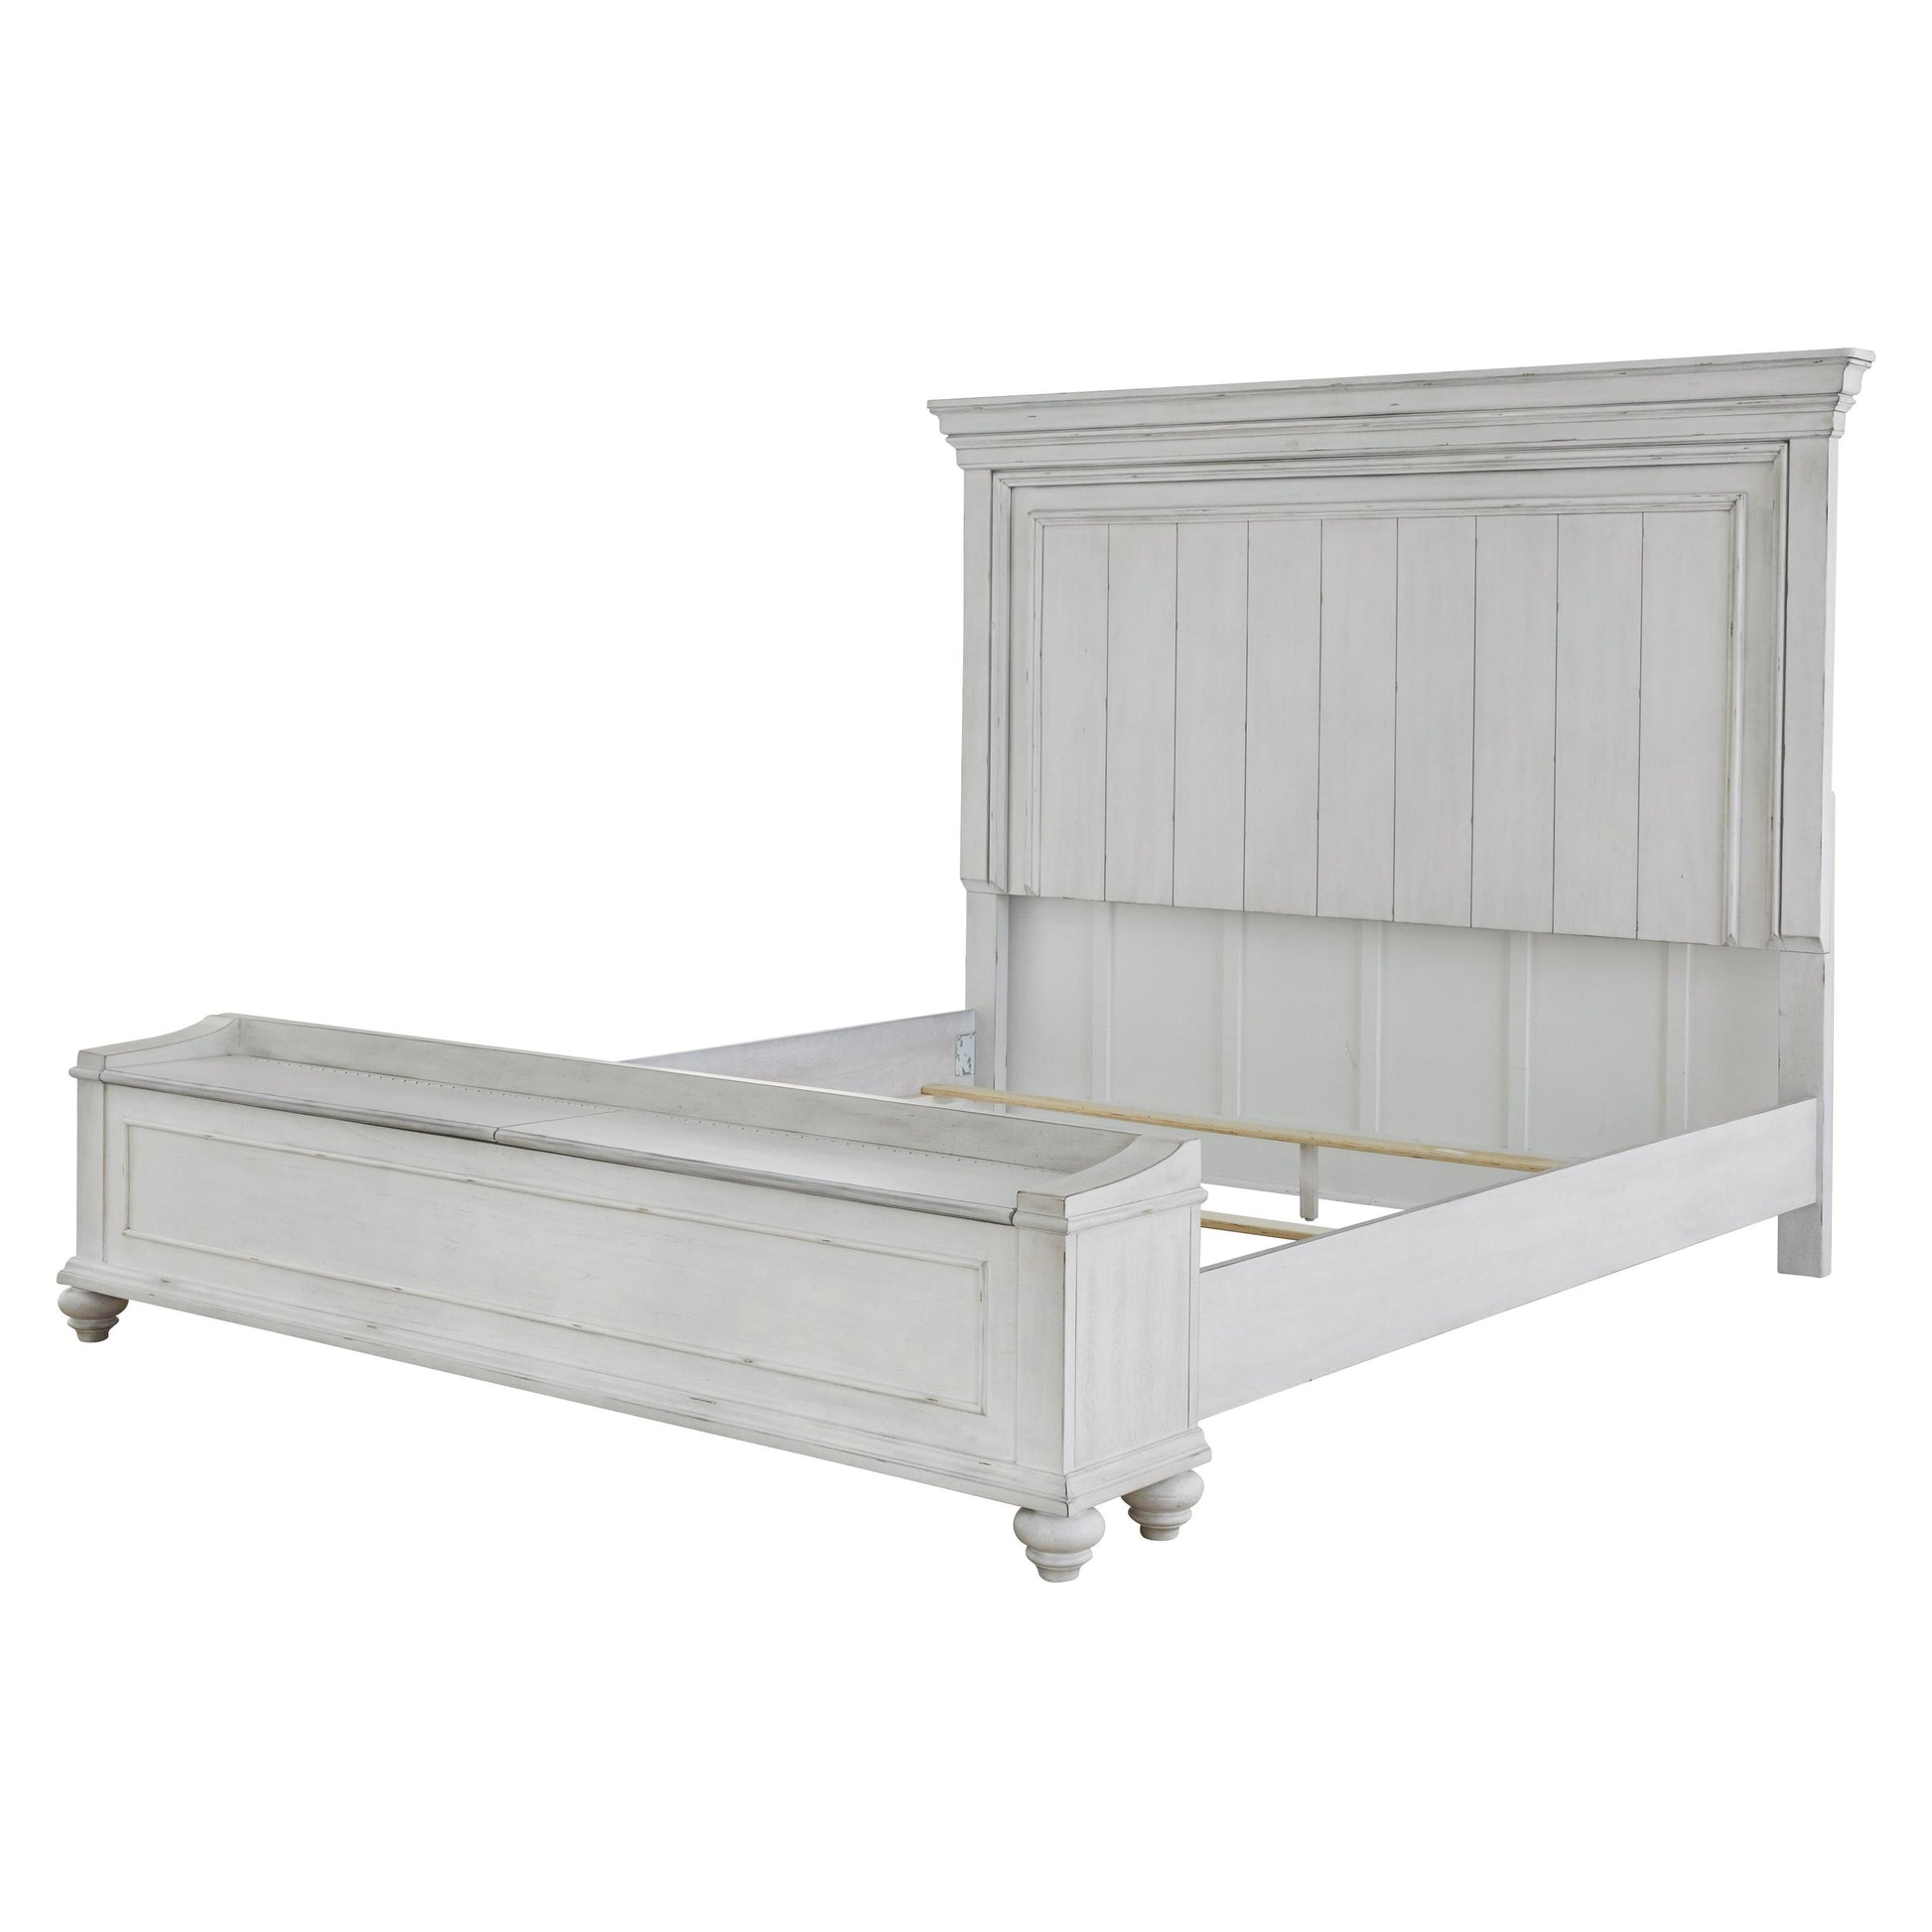 Benchcraft Kanwyn Queen Panel Bed with Storage B777-57/B777-54S/B777-96